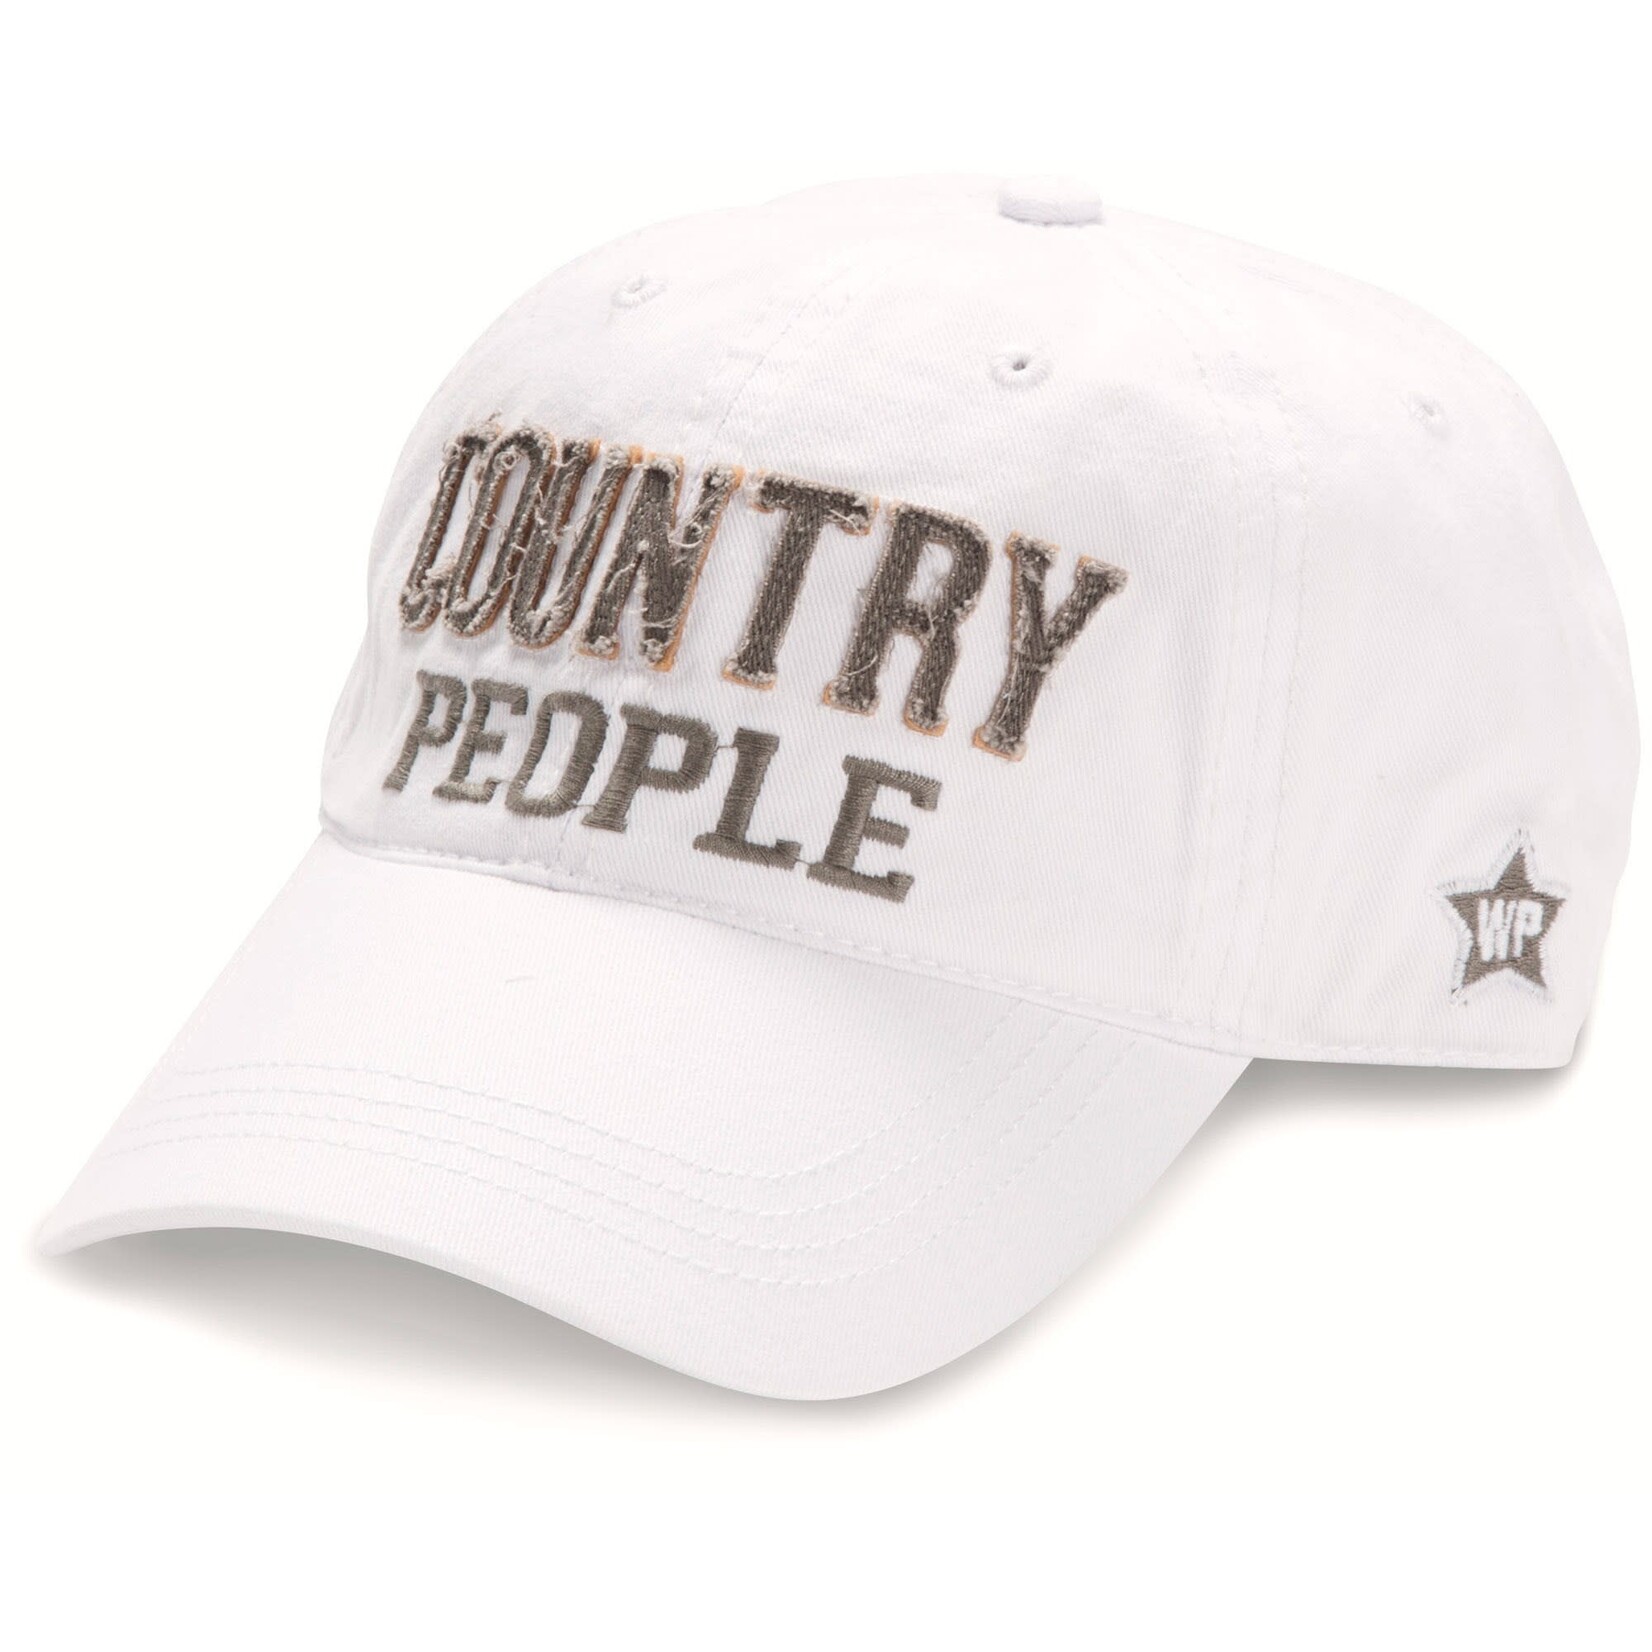 Country People White Adjustable Hat